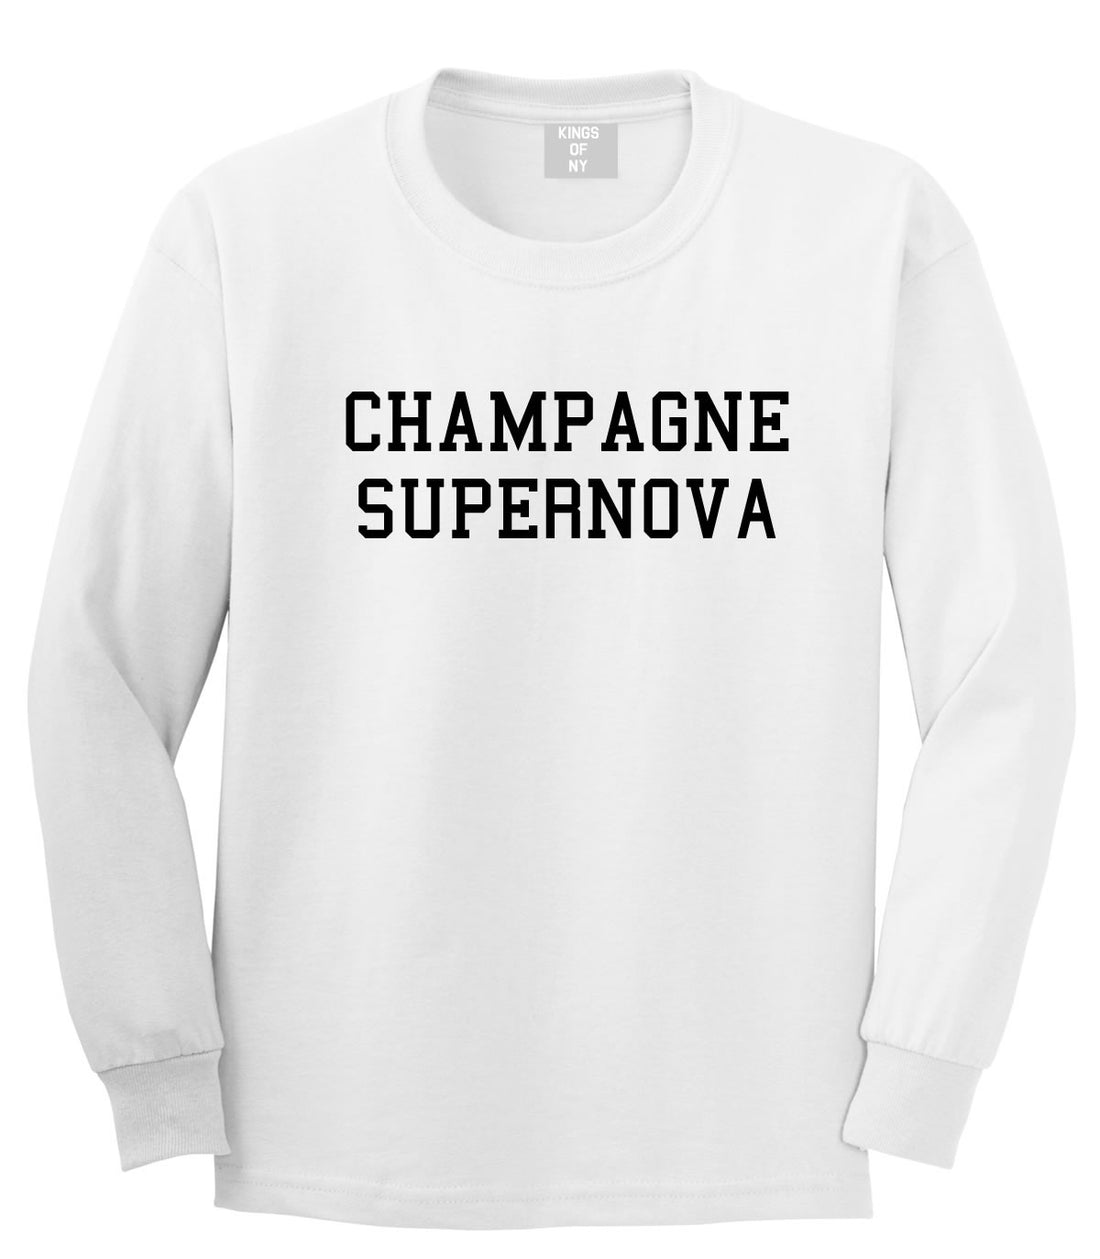 Champagne Supernova Long Sleeve T-Shirt in White by Kings Of NY